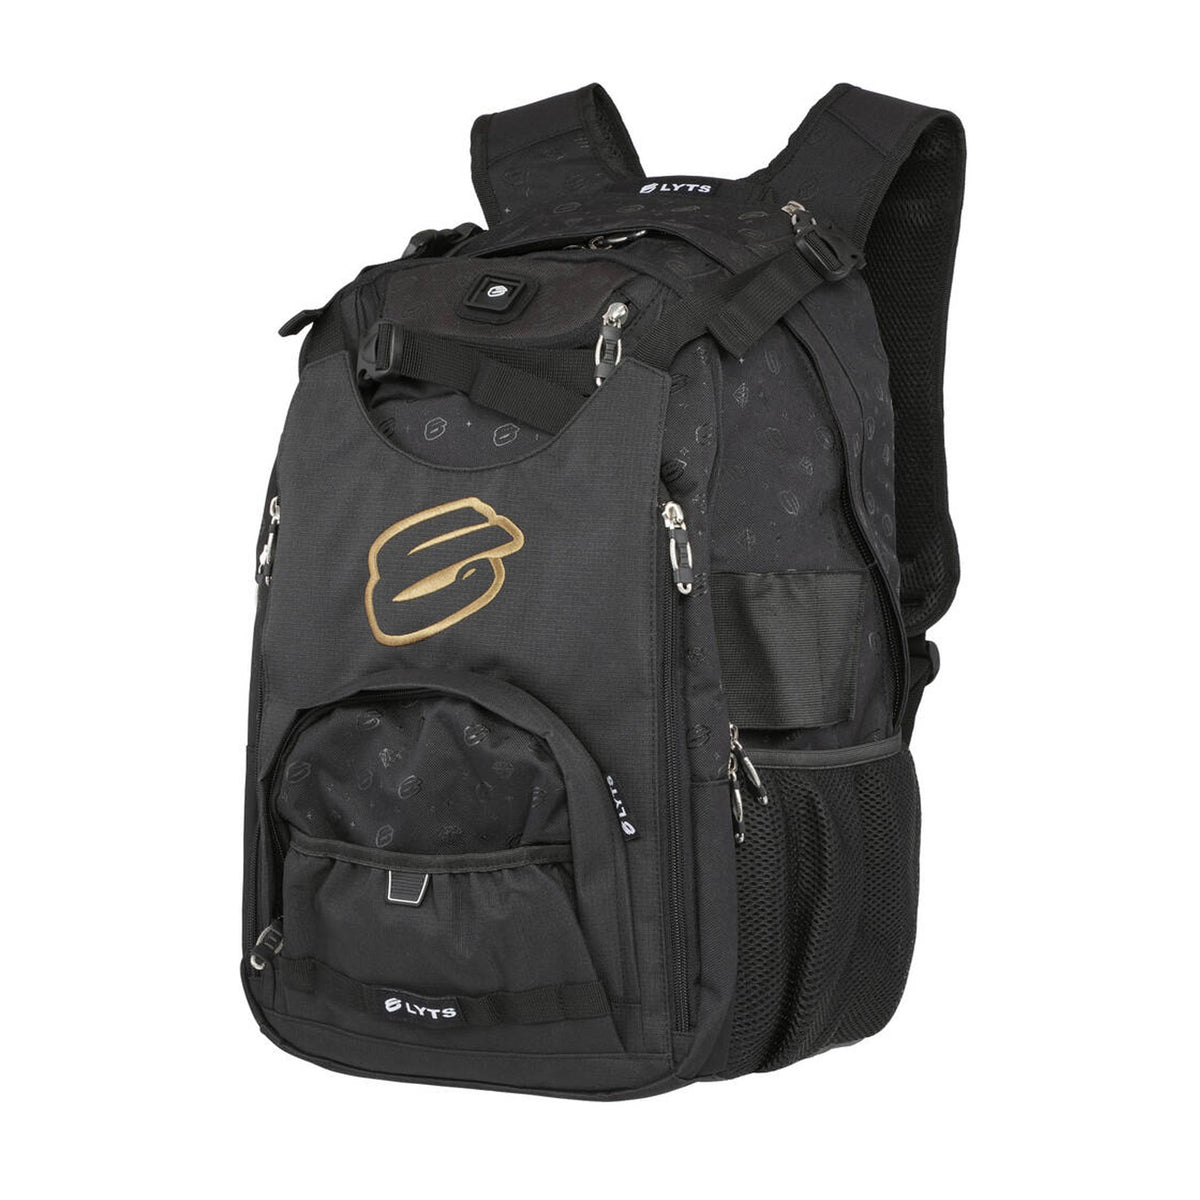 Travel Backpack for Skateboards | Scooters | Protective Gears - Roller Skates Parts and Accessories | JT Skate